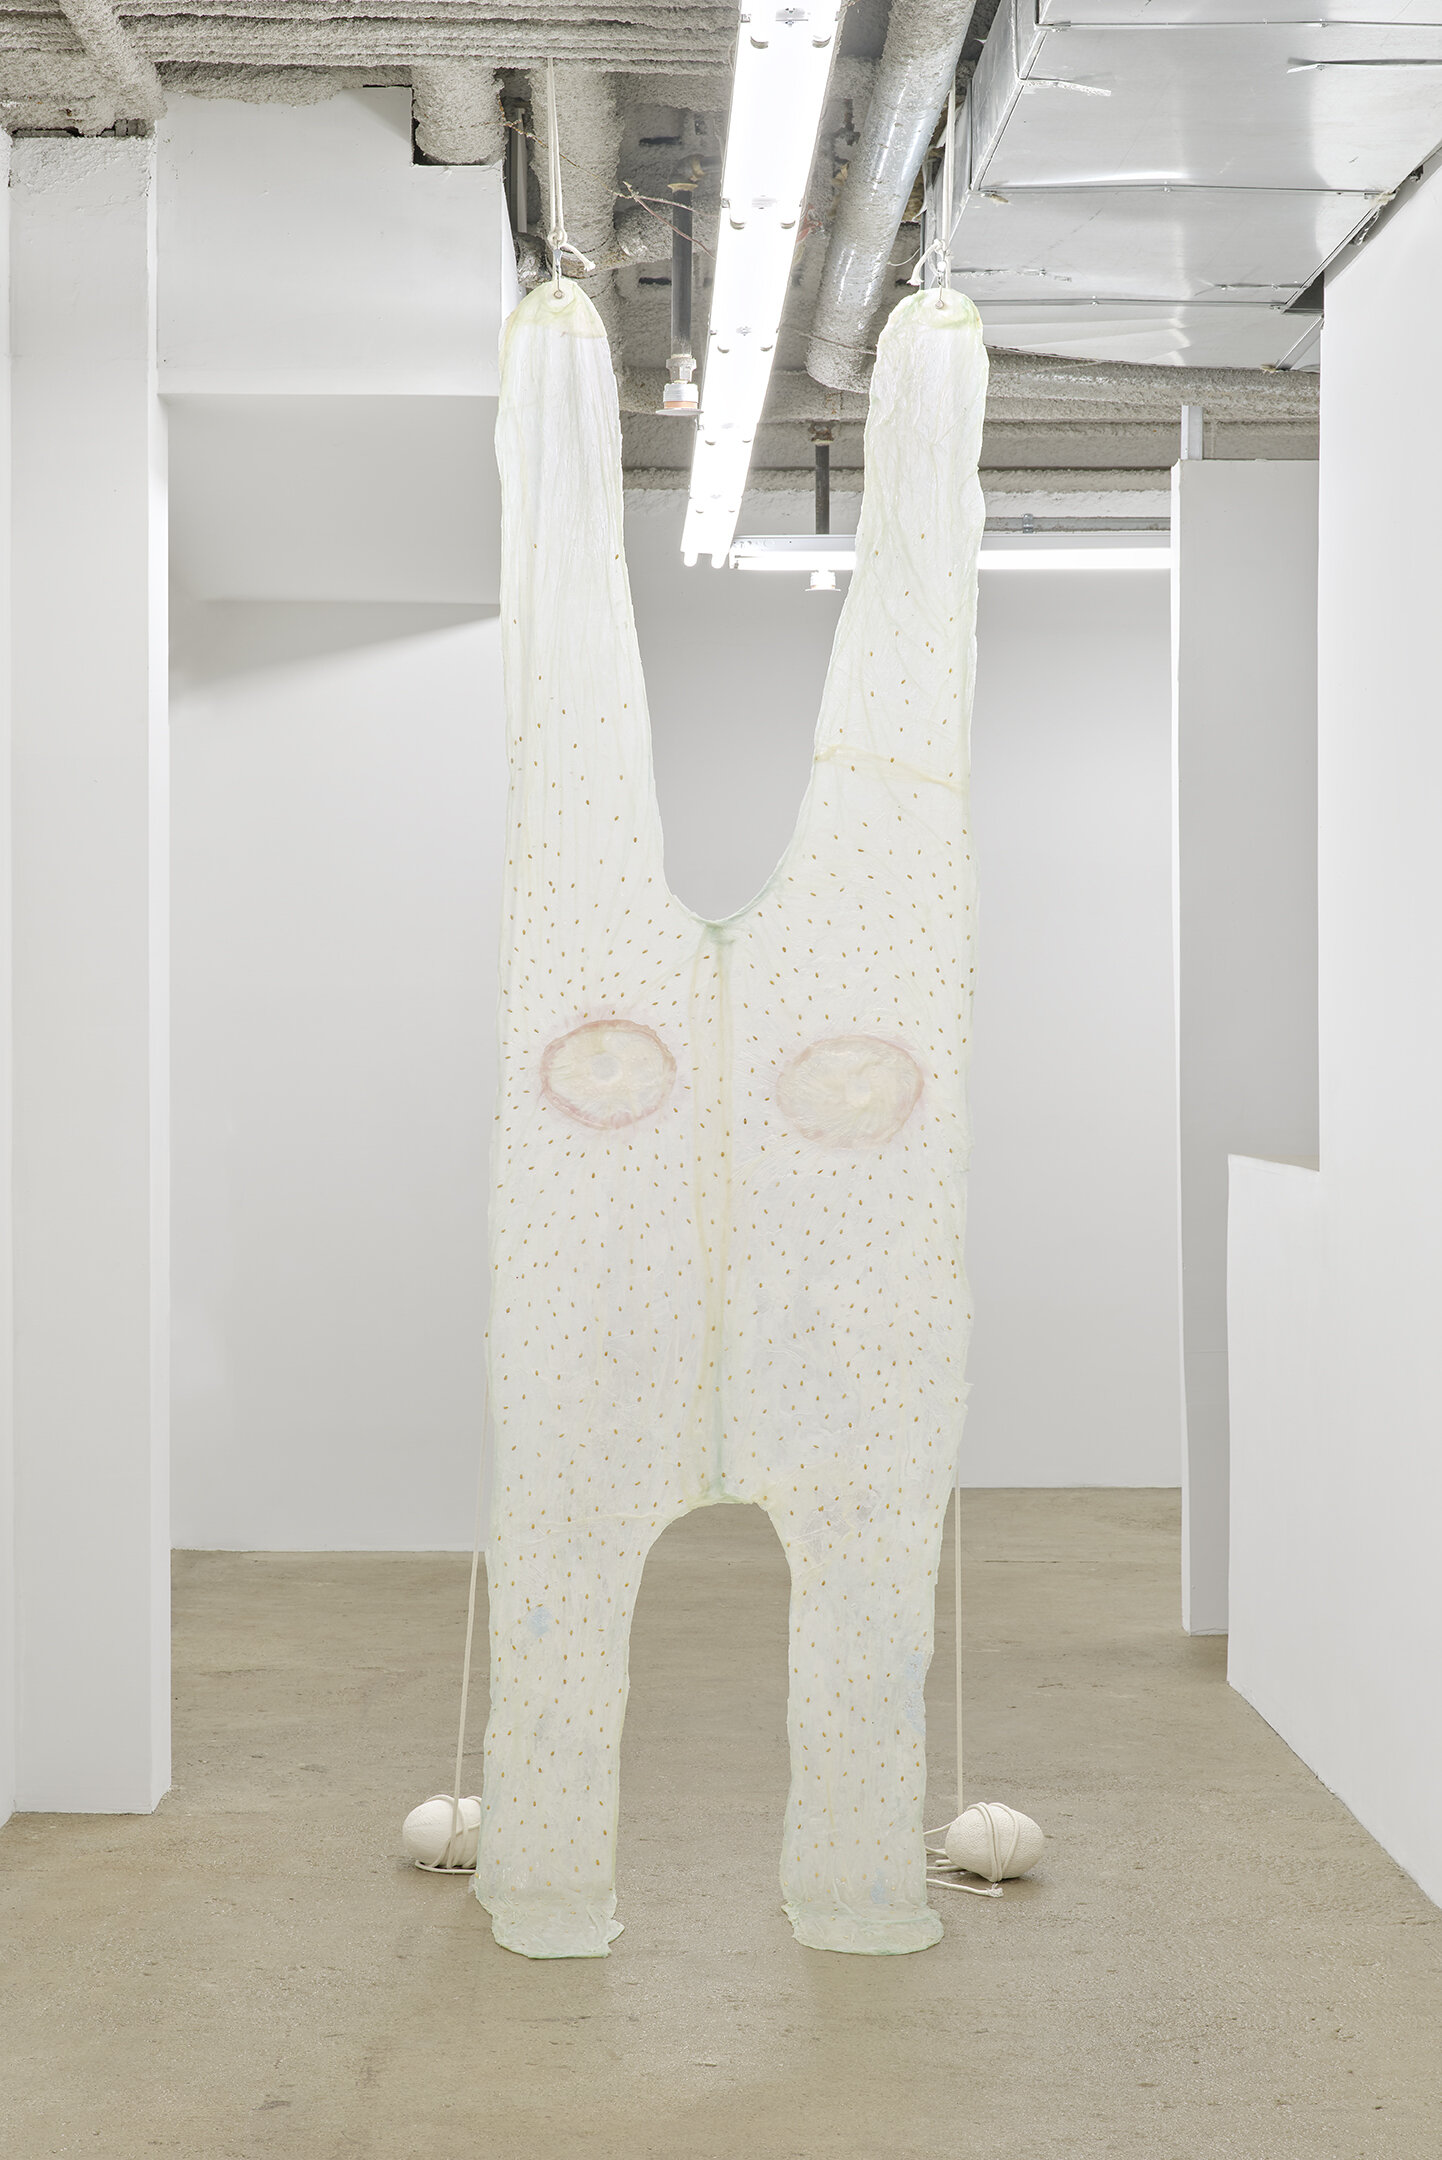  Karinne Smith  Longburger , 2021 Collagen dyed with soda, melon seeds, baby powder,  agar agar, glycerin, sprinkles, silicone,  clamps, cotton rope, cast plaster melons  116 x 39 x 36 inches (295 x 99 x 91 cm) (KS2) 